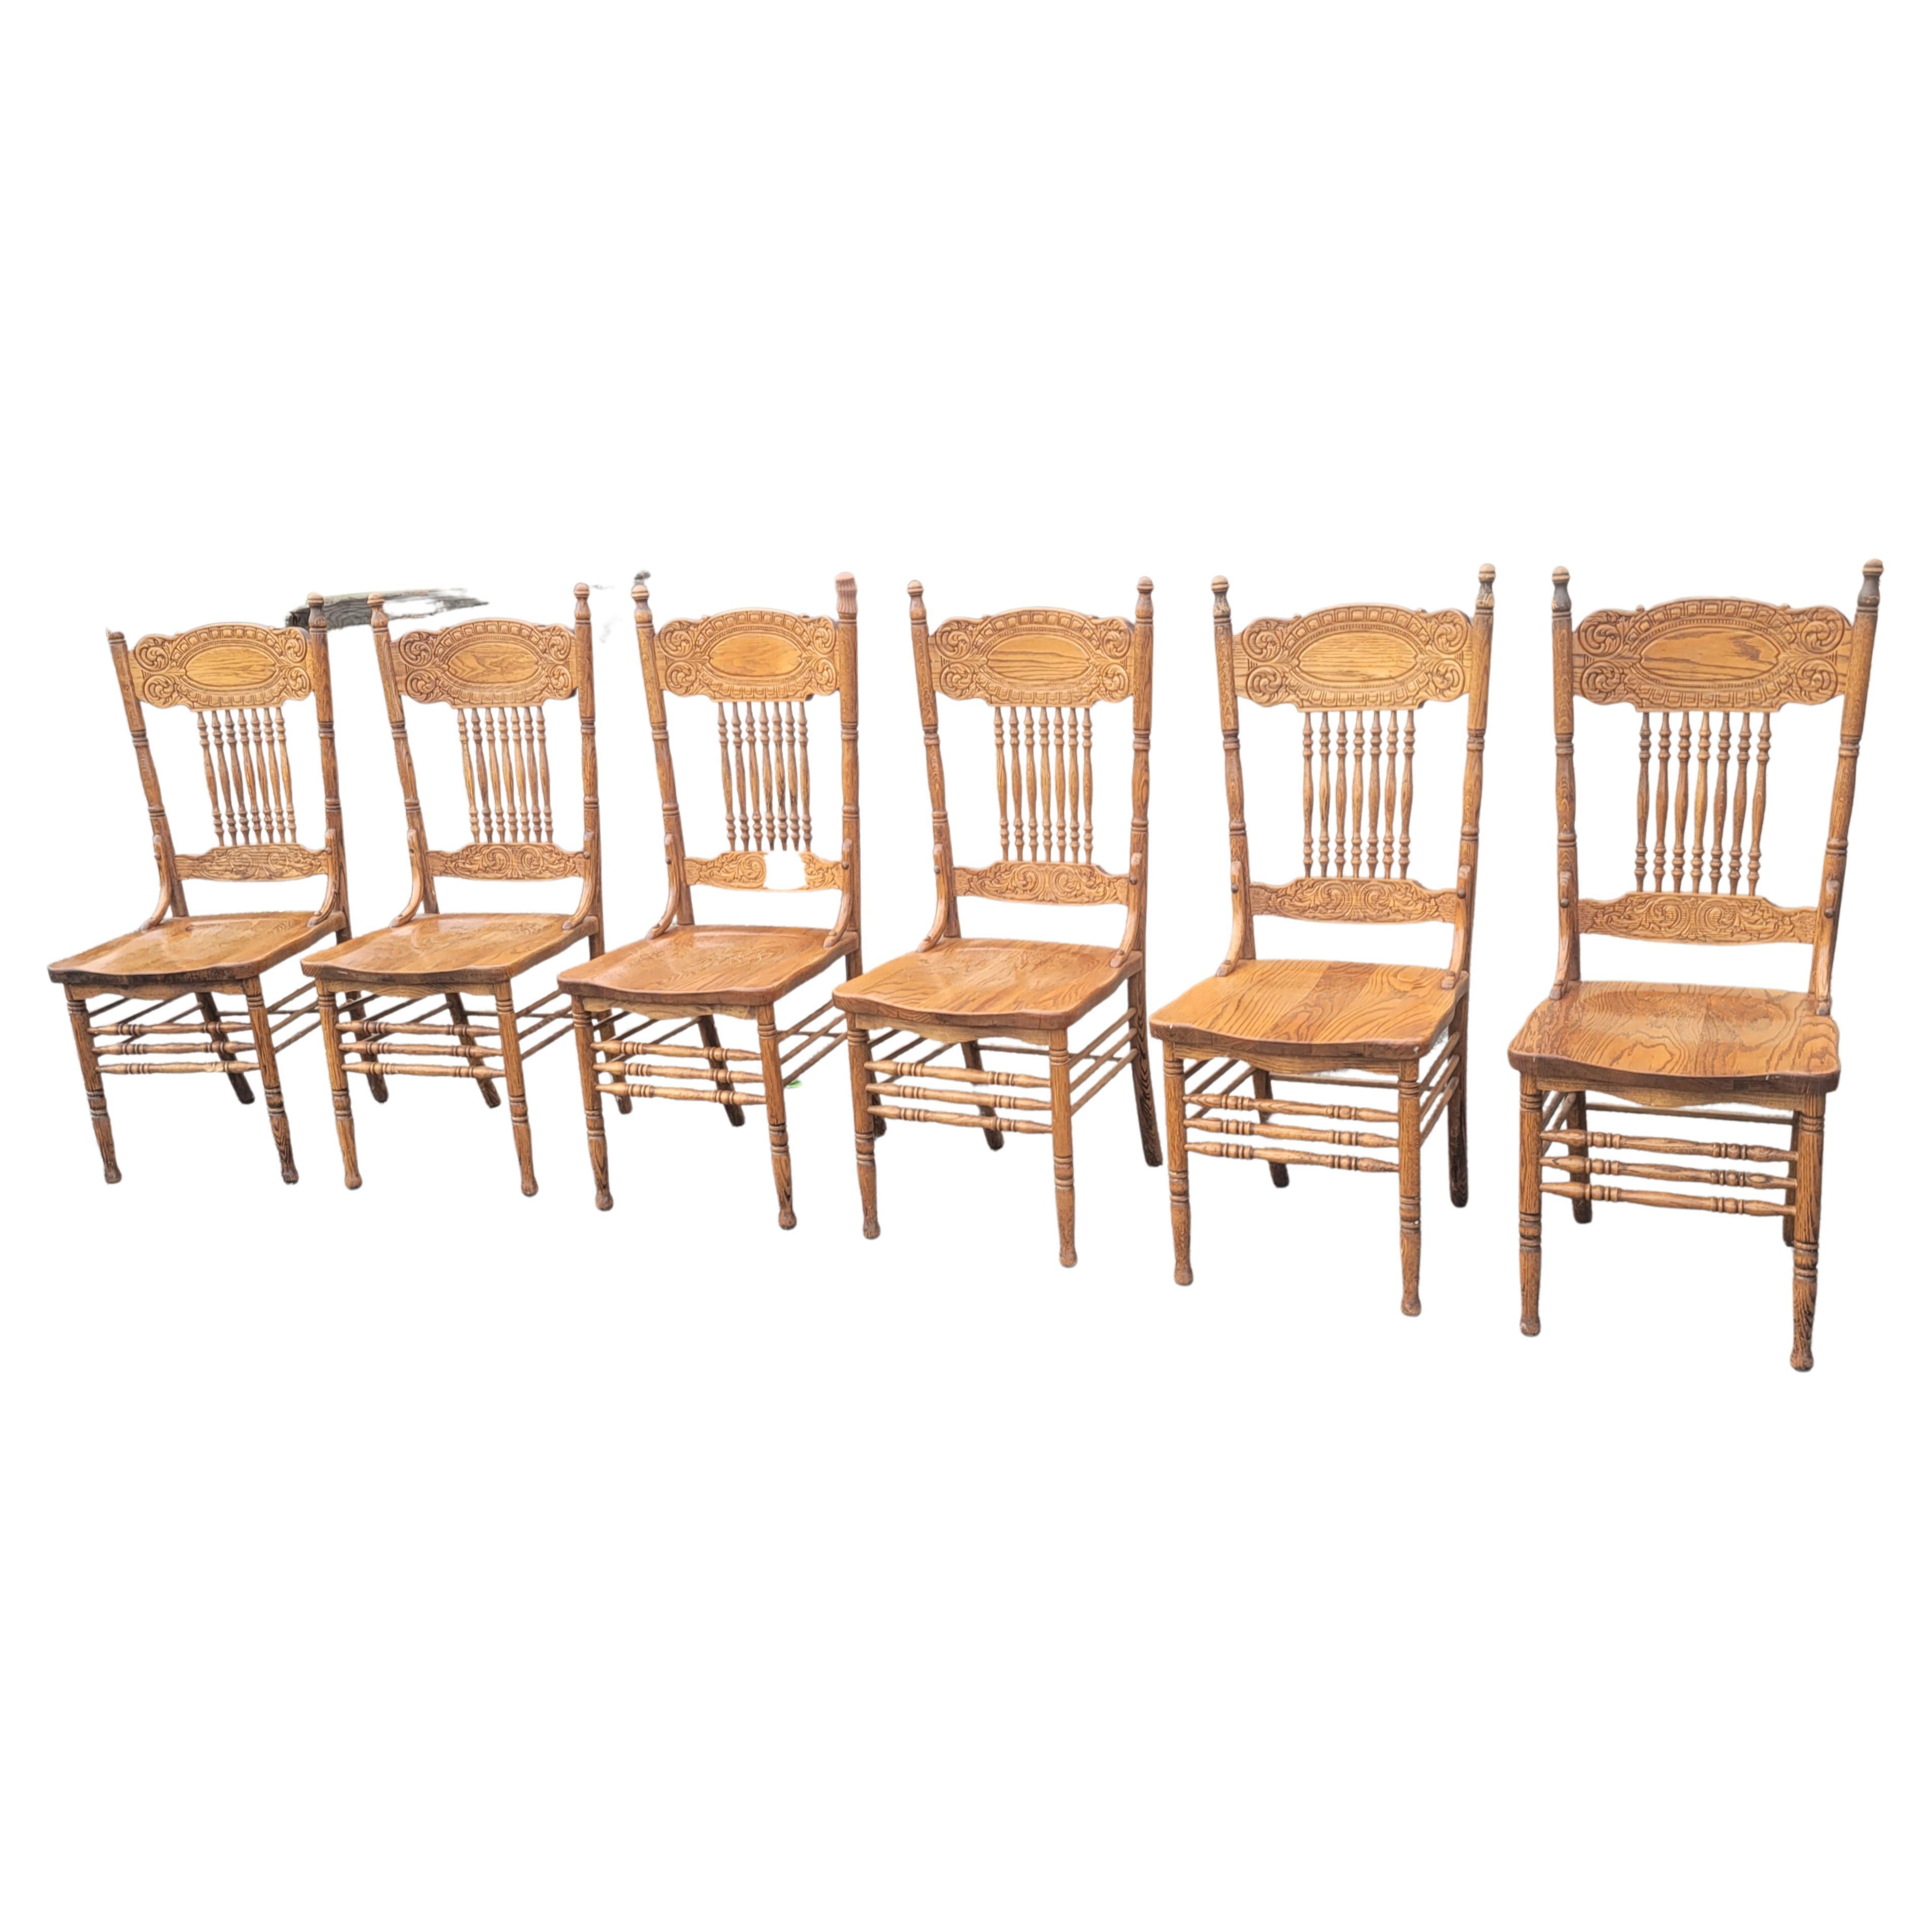 For your consideration is a set of Vintage Mona Liza Fine Furniture handcrafted oak press back dining chairs in very good vintage condition.
 